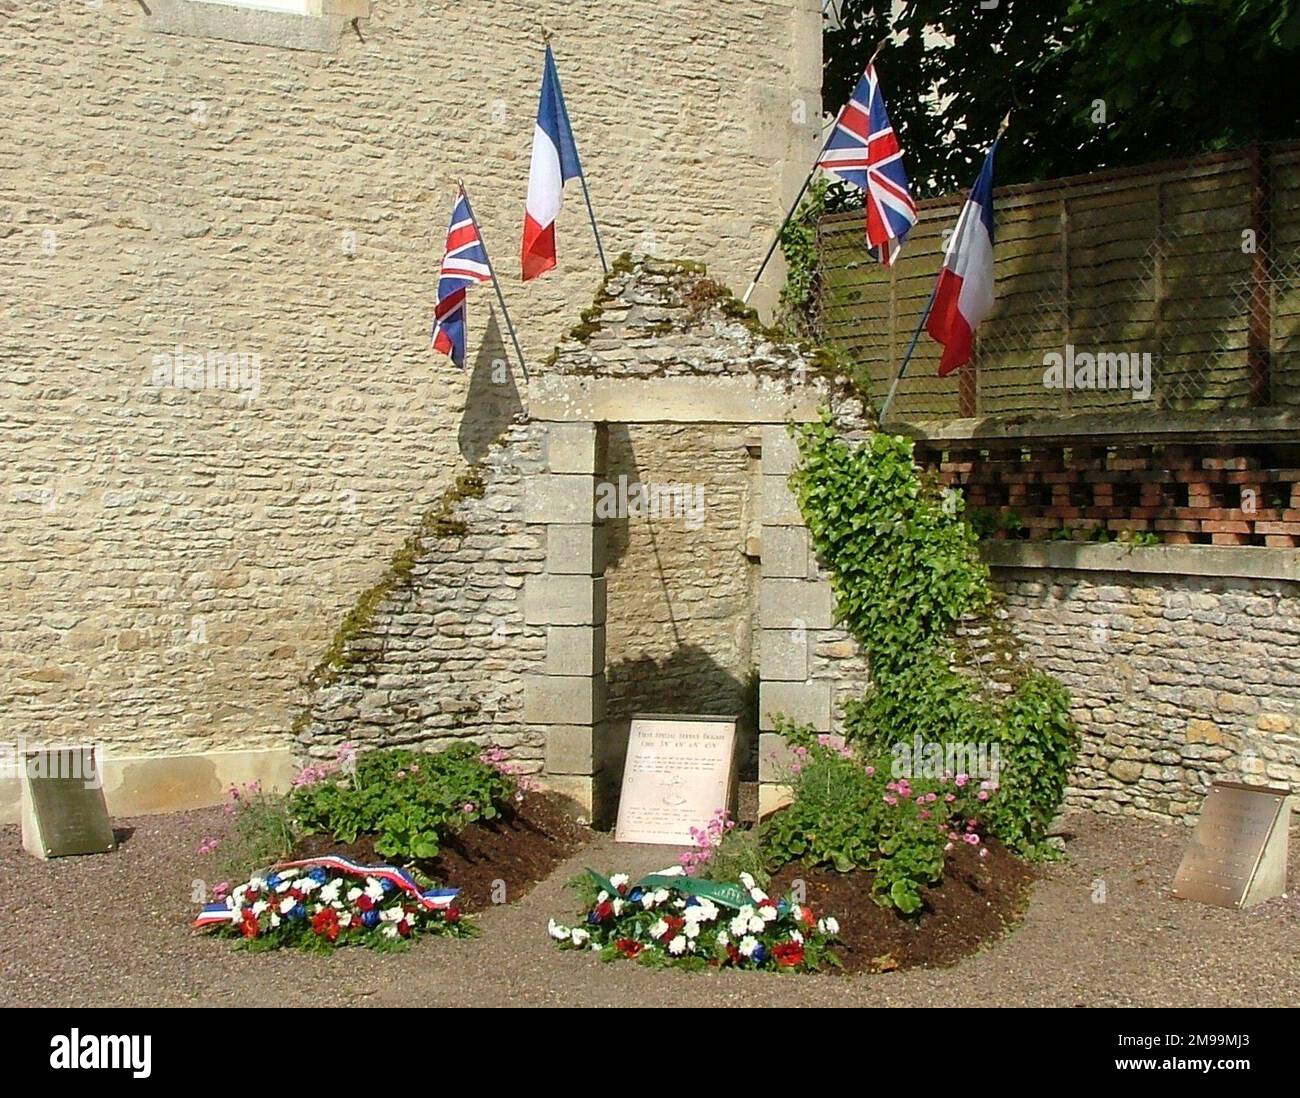 In the centre of this rather untidy collection of memorials in the centre of the village is one to 1st Special Service Brigade and flanking it are plaques to the Civilian Victims and to 6th Airlanding Brigade in Operation Mallard. This was the code name for the second lift of airborne troops into Normandy. The leading aircraft began to arrive around 2100 hours on D-Day. Stock Photo